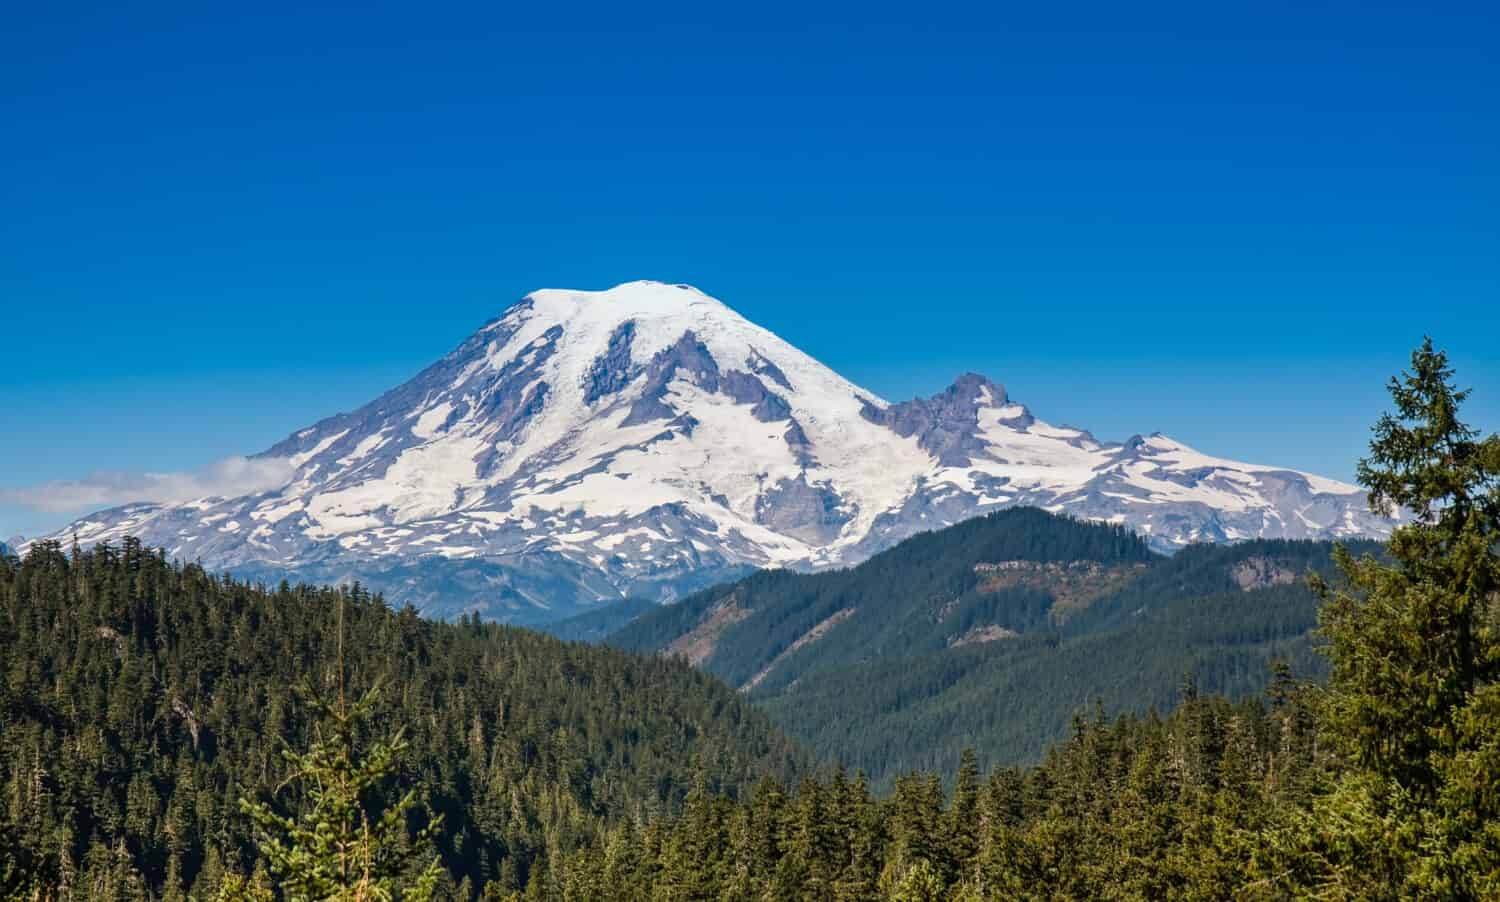 Mount Rainier towers over the surrounding mountains sitting at an elevation of 14,411 ft. It is considered to be one of the world's most dangerous volcanoes.